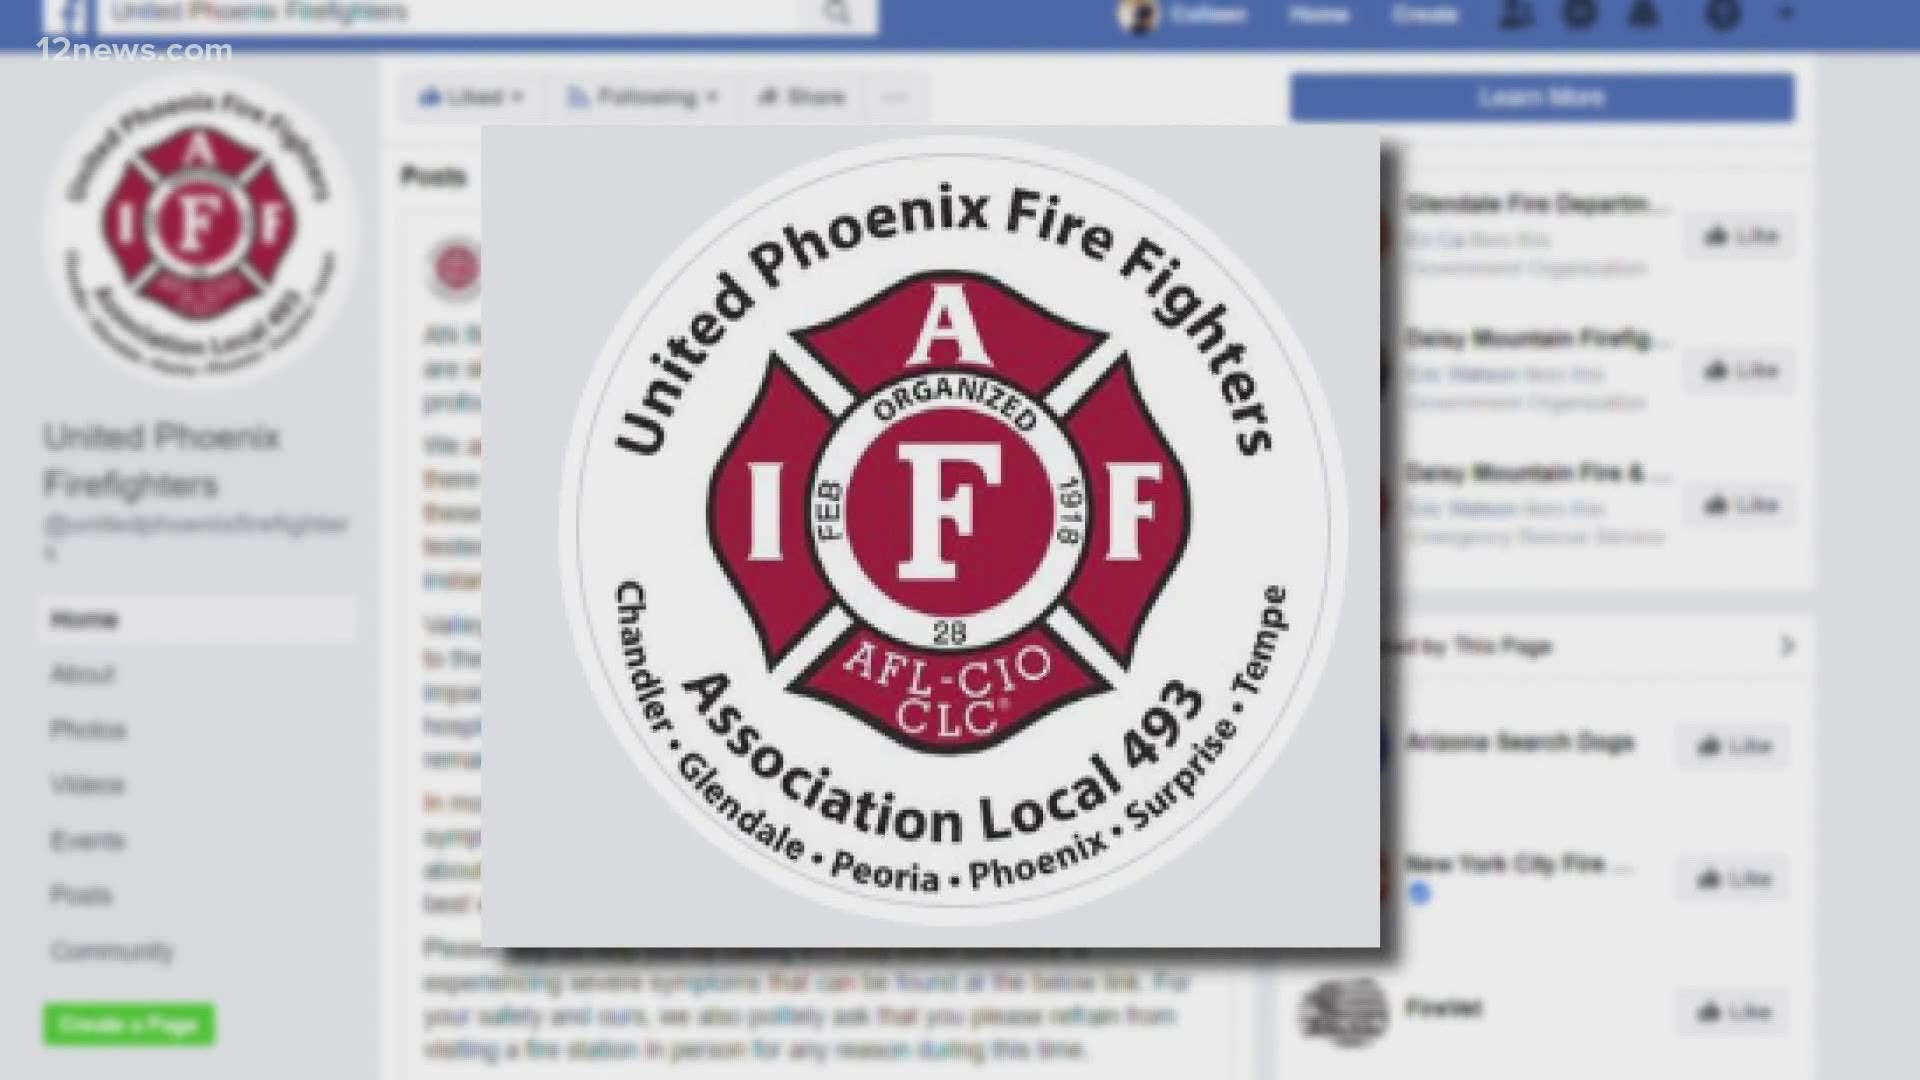 United Phoenix Firefighters wrote a plea to the community to help limit the spread of COVID-19.